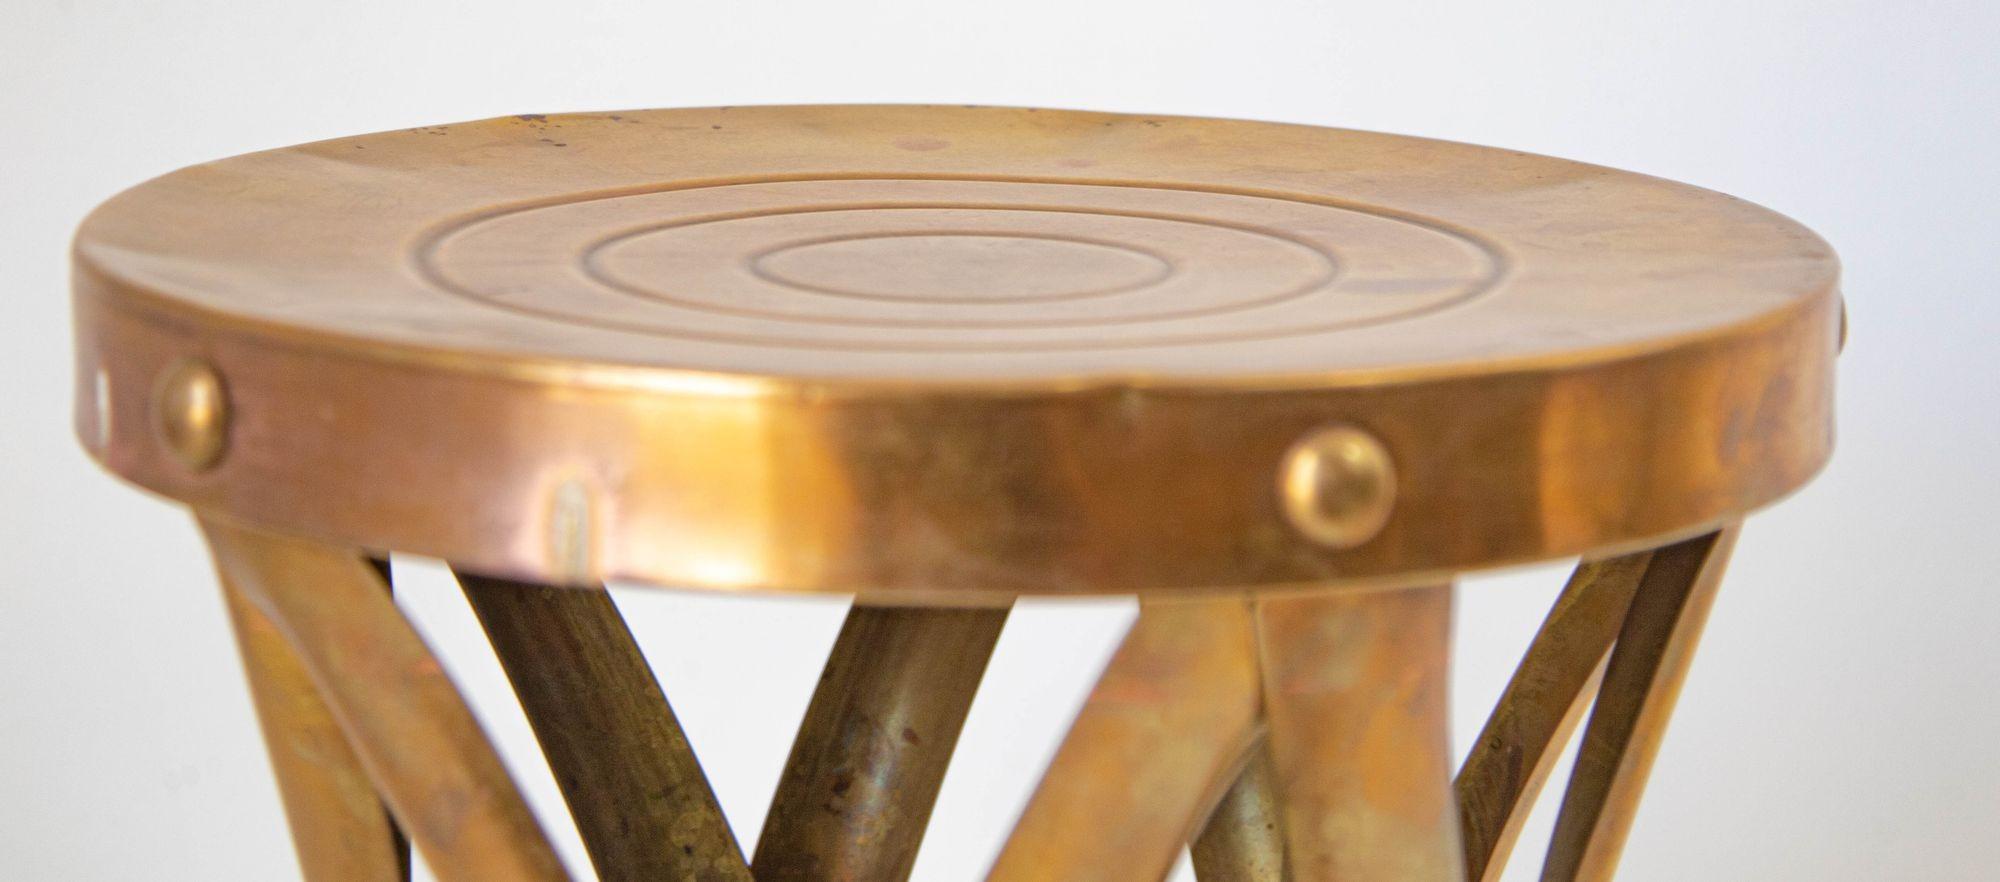 drum stool side table